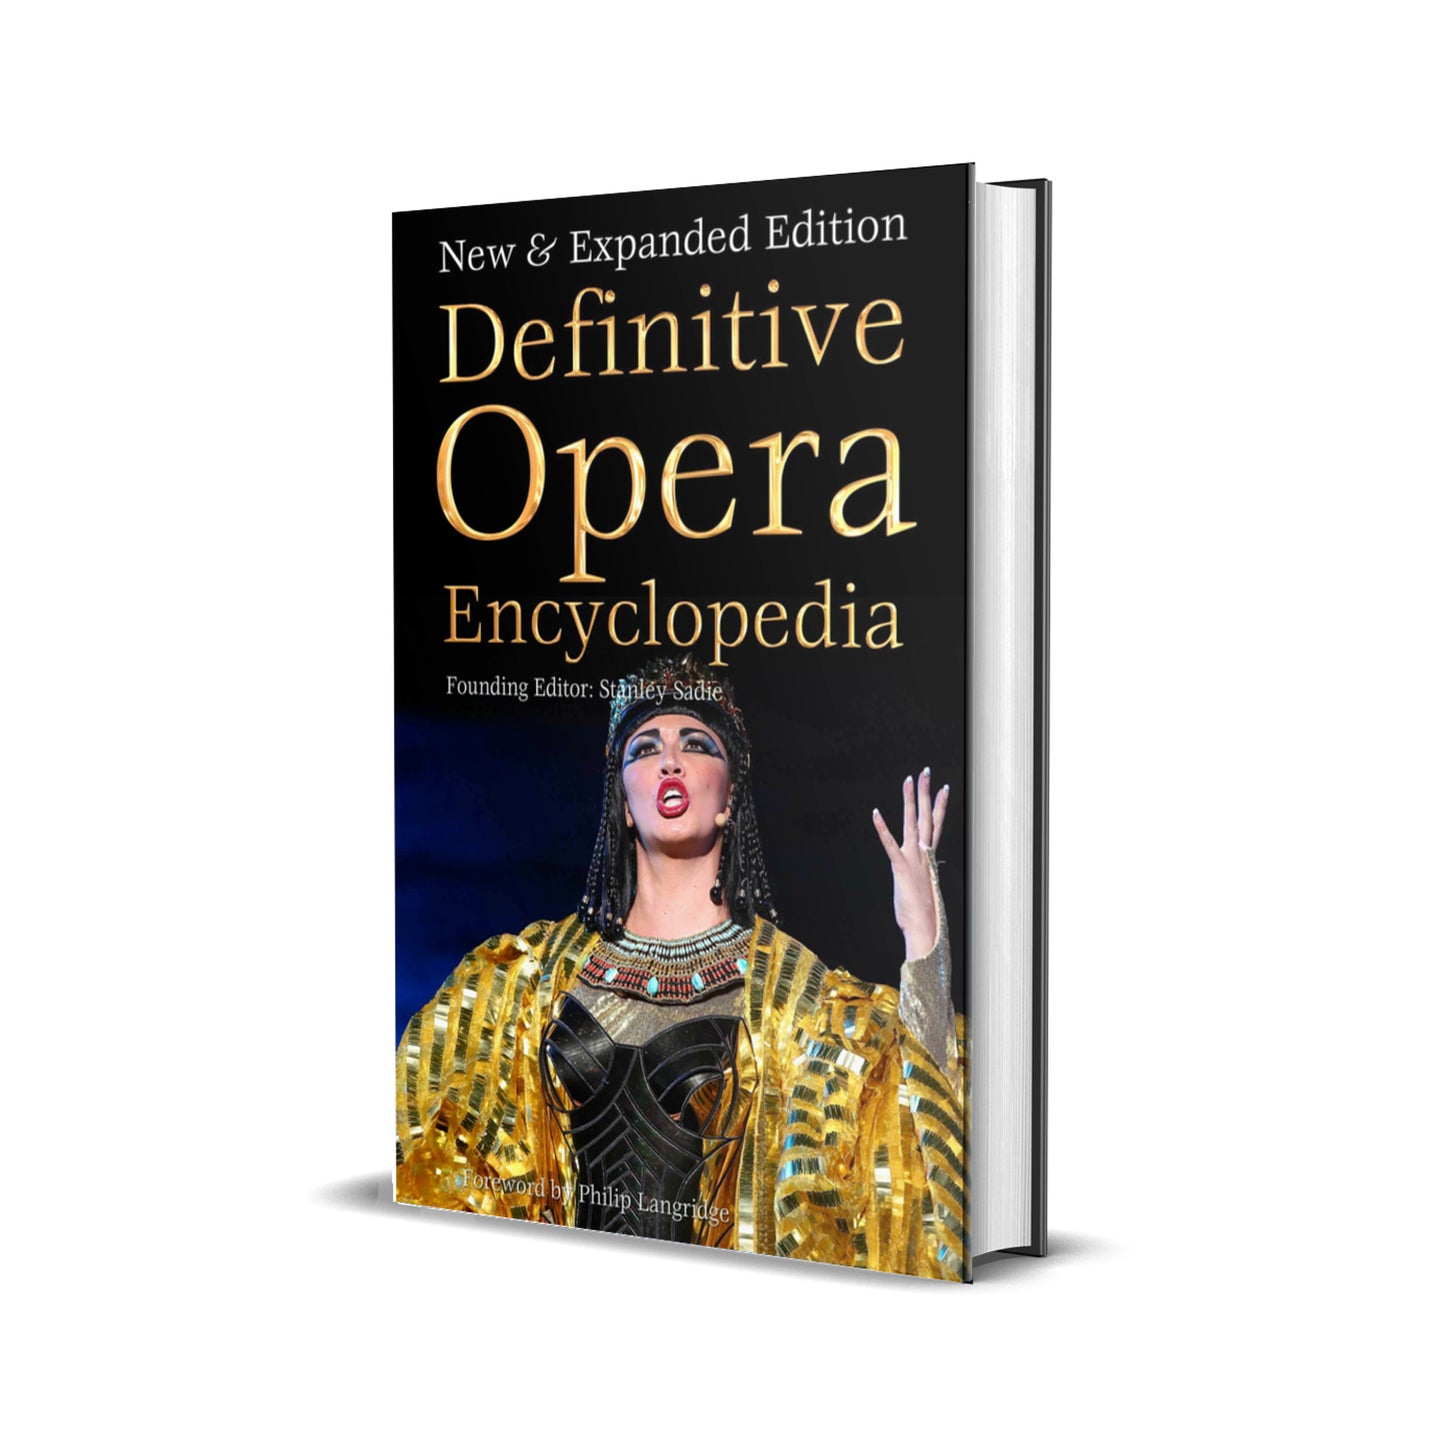 Definitive Opera Encyclopedia, New & Expanded Edition